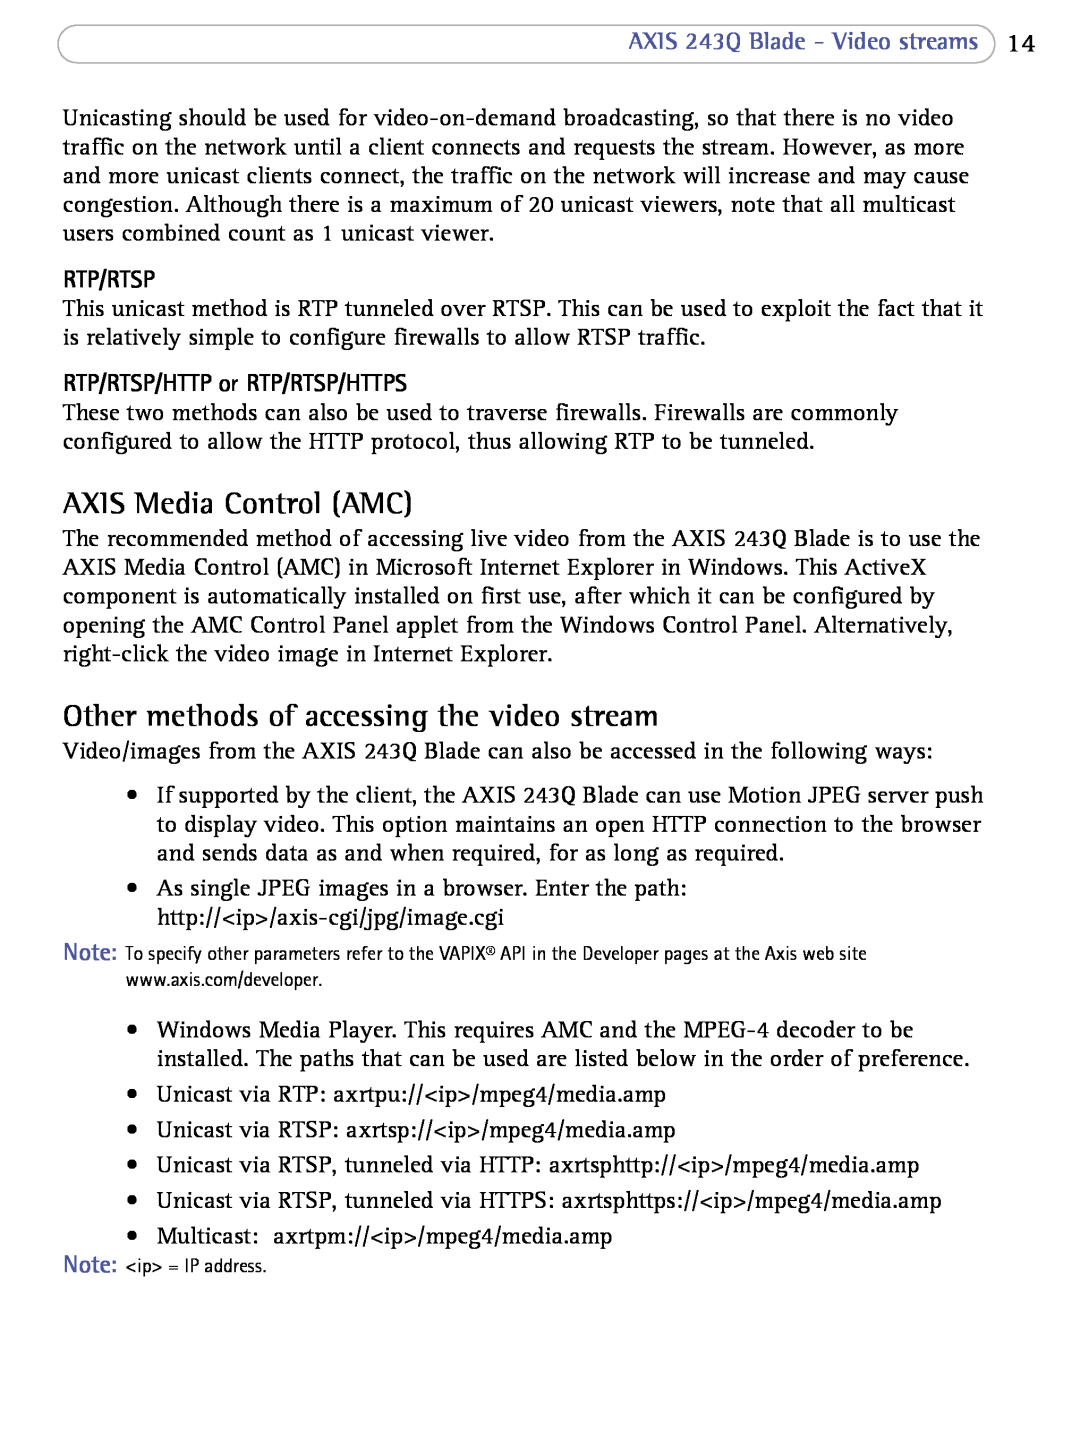 Axis Communications 243Q user manual AXIS Media Control AMC, Other methods of accessing the video stream, Rtp/Rtsp 